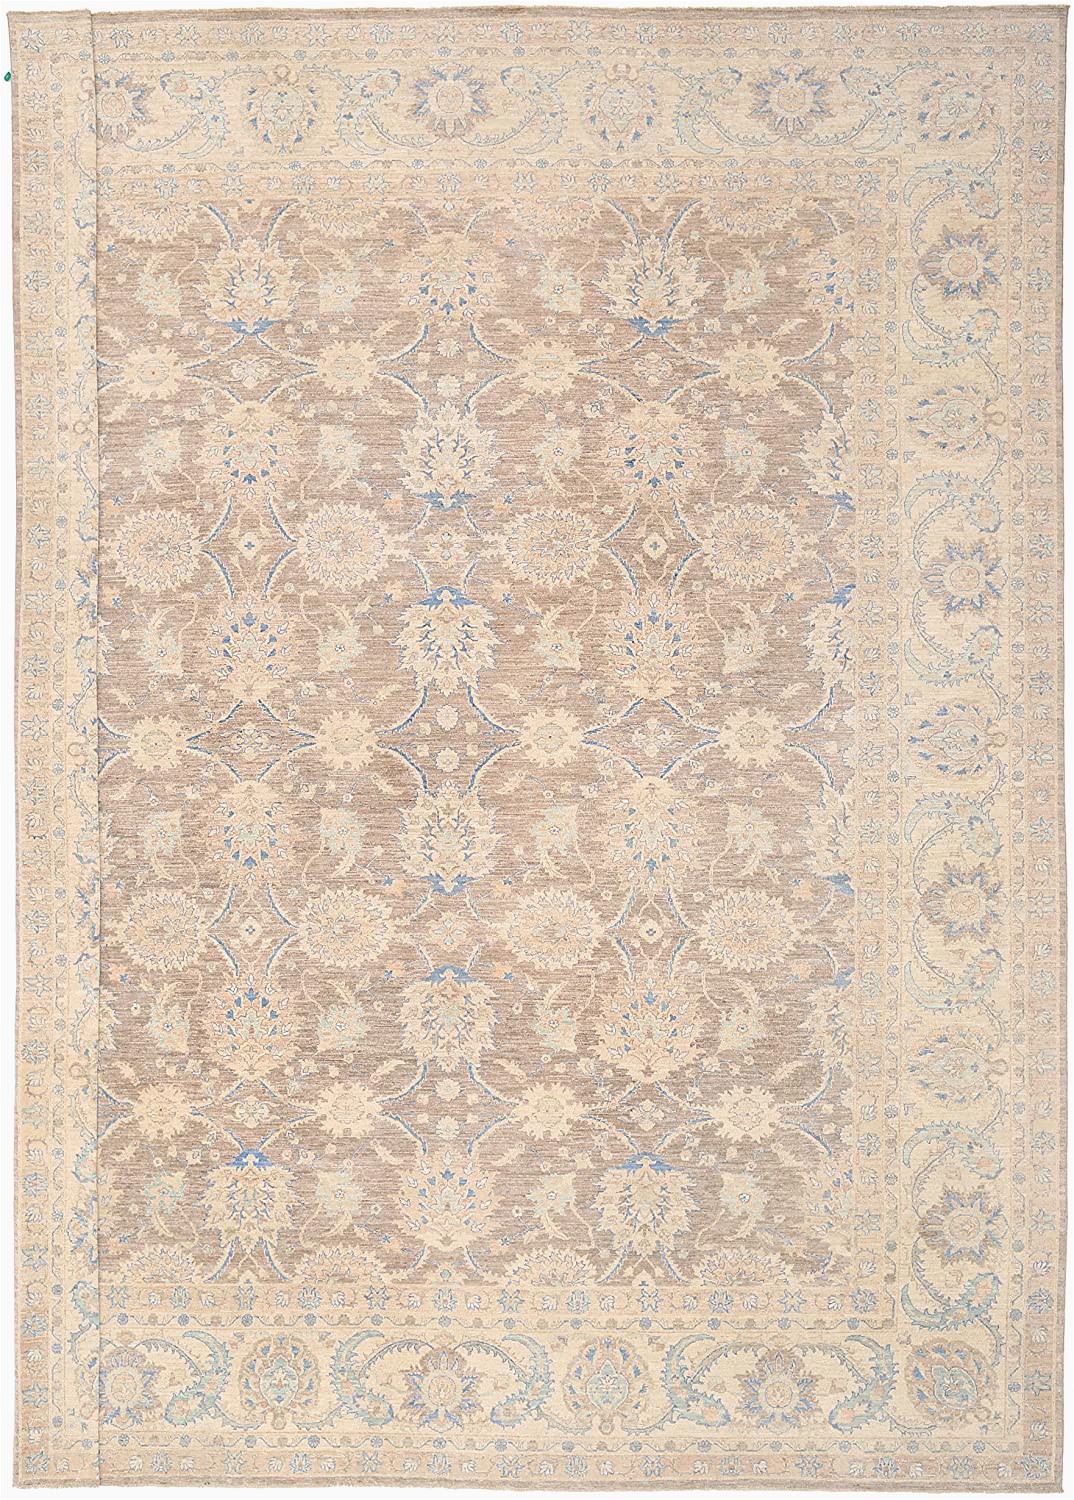 15 X 18 area Rug Amazon Pasargad Carpets Ferehan Collection Hand Knotted